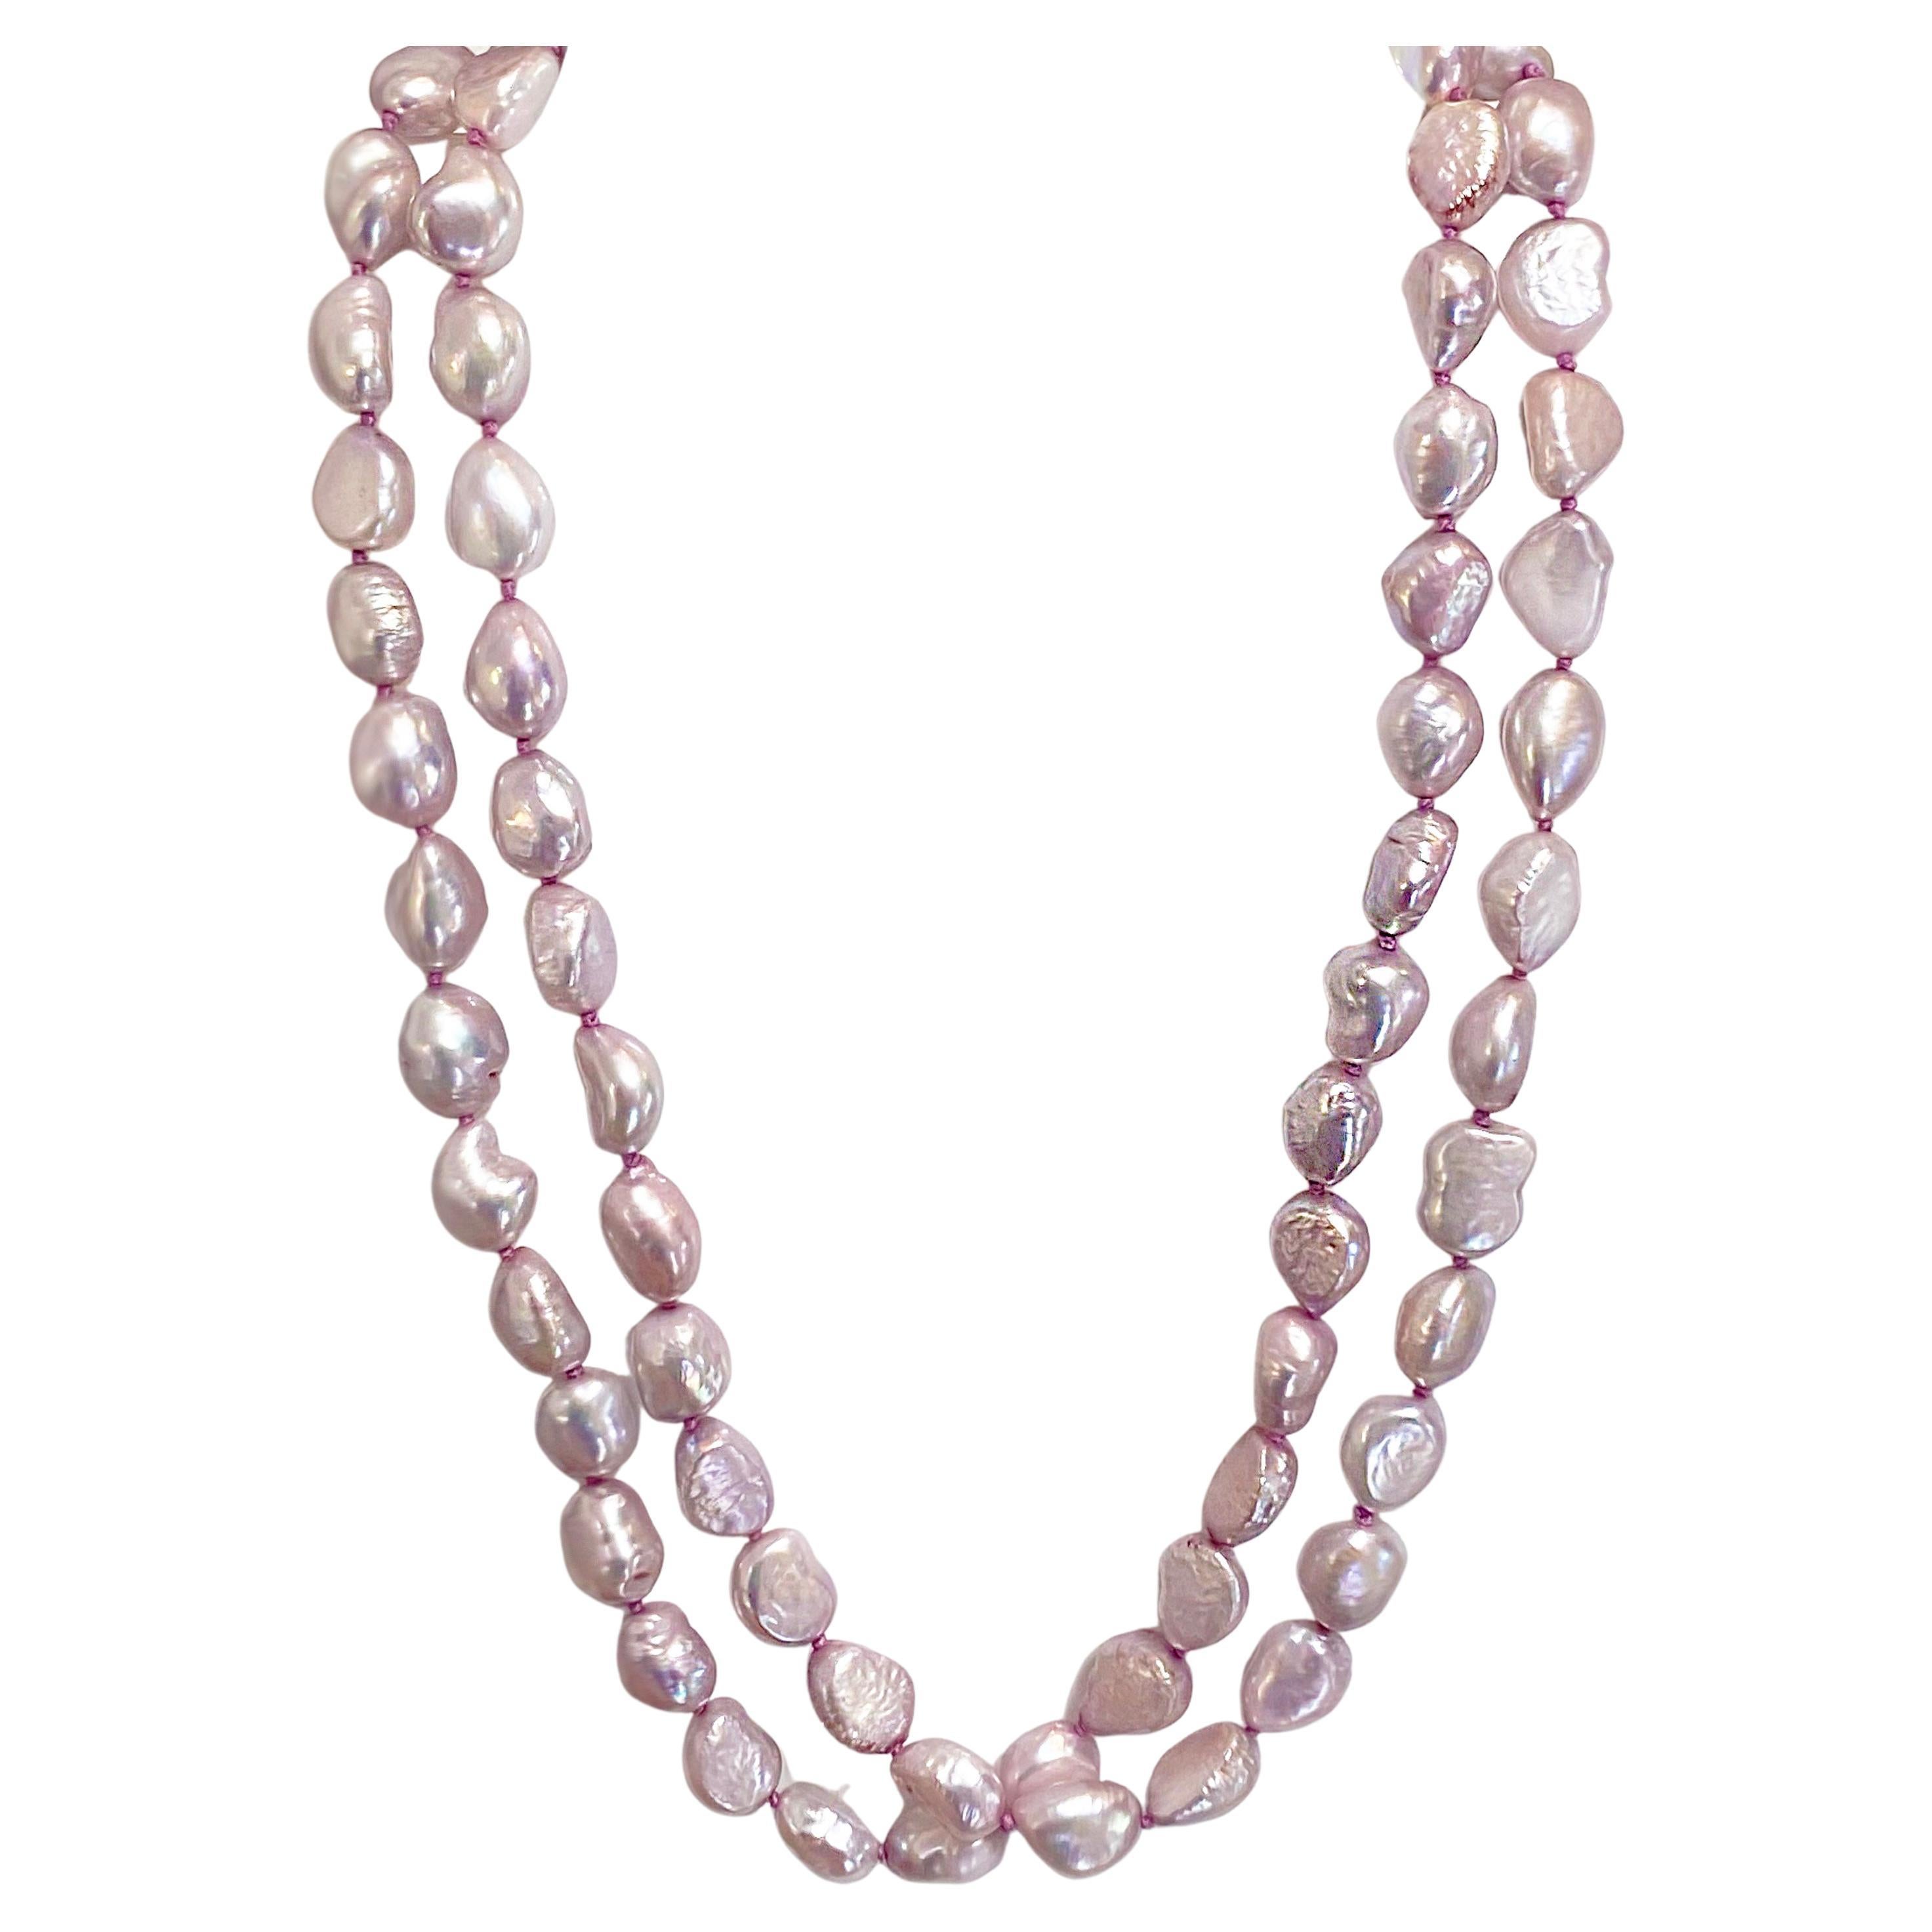 Rose Cultured Pearls, Genuine Pink Pearls w Lobster Clasp